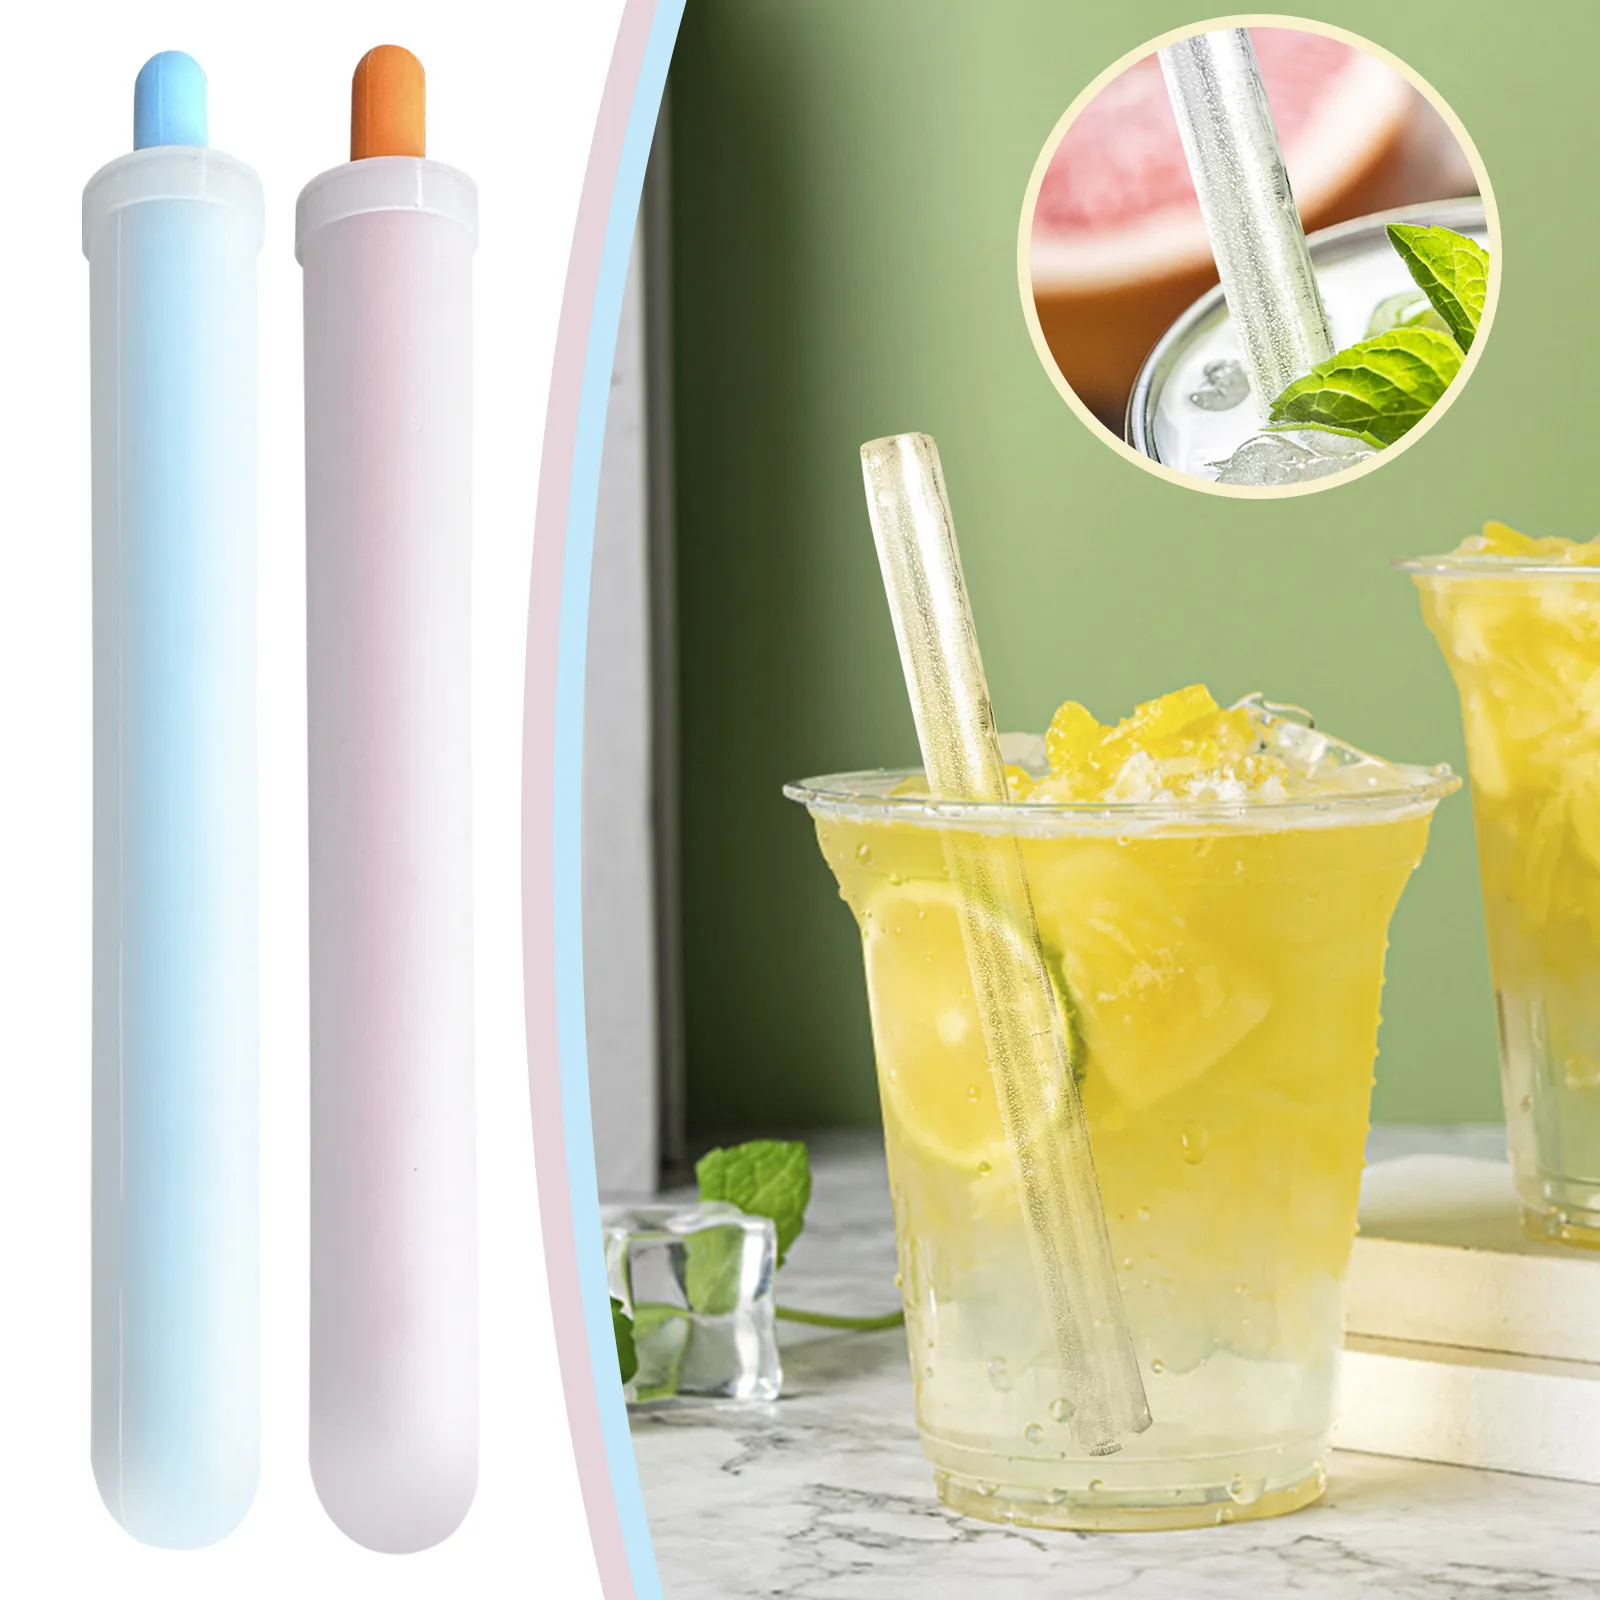 

Ice Straw, Silicone Ice Straw Molds, Drinking Straw Mould, Reduce Plastic Waste, Reusable Silicone Mold, Eco-Friendly Straw